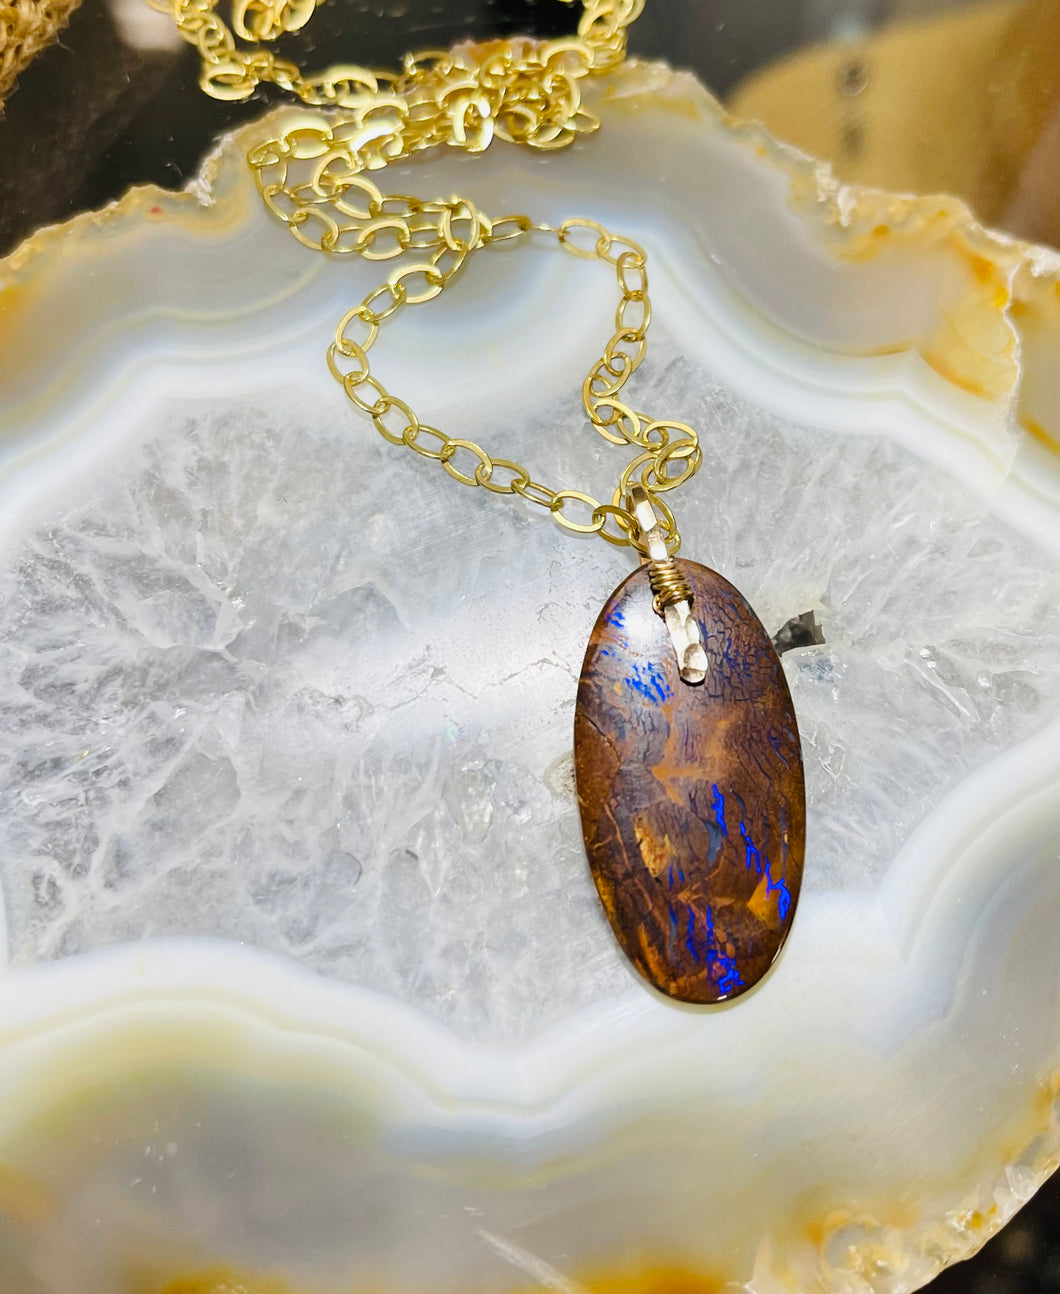 Pendant with koroit opal with purple and brown shades